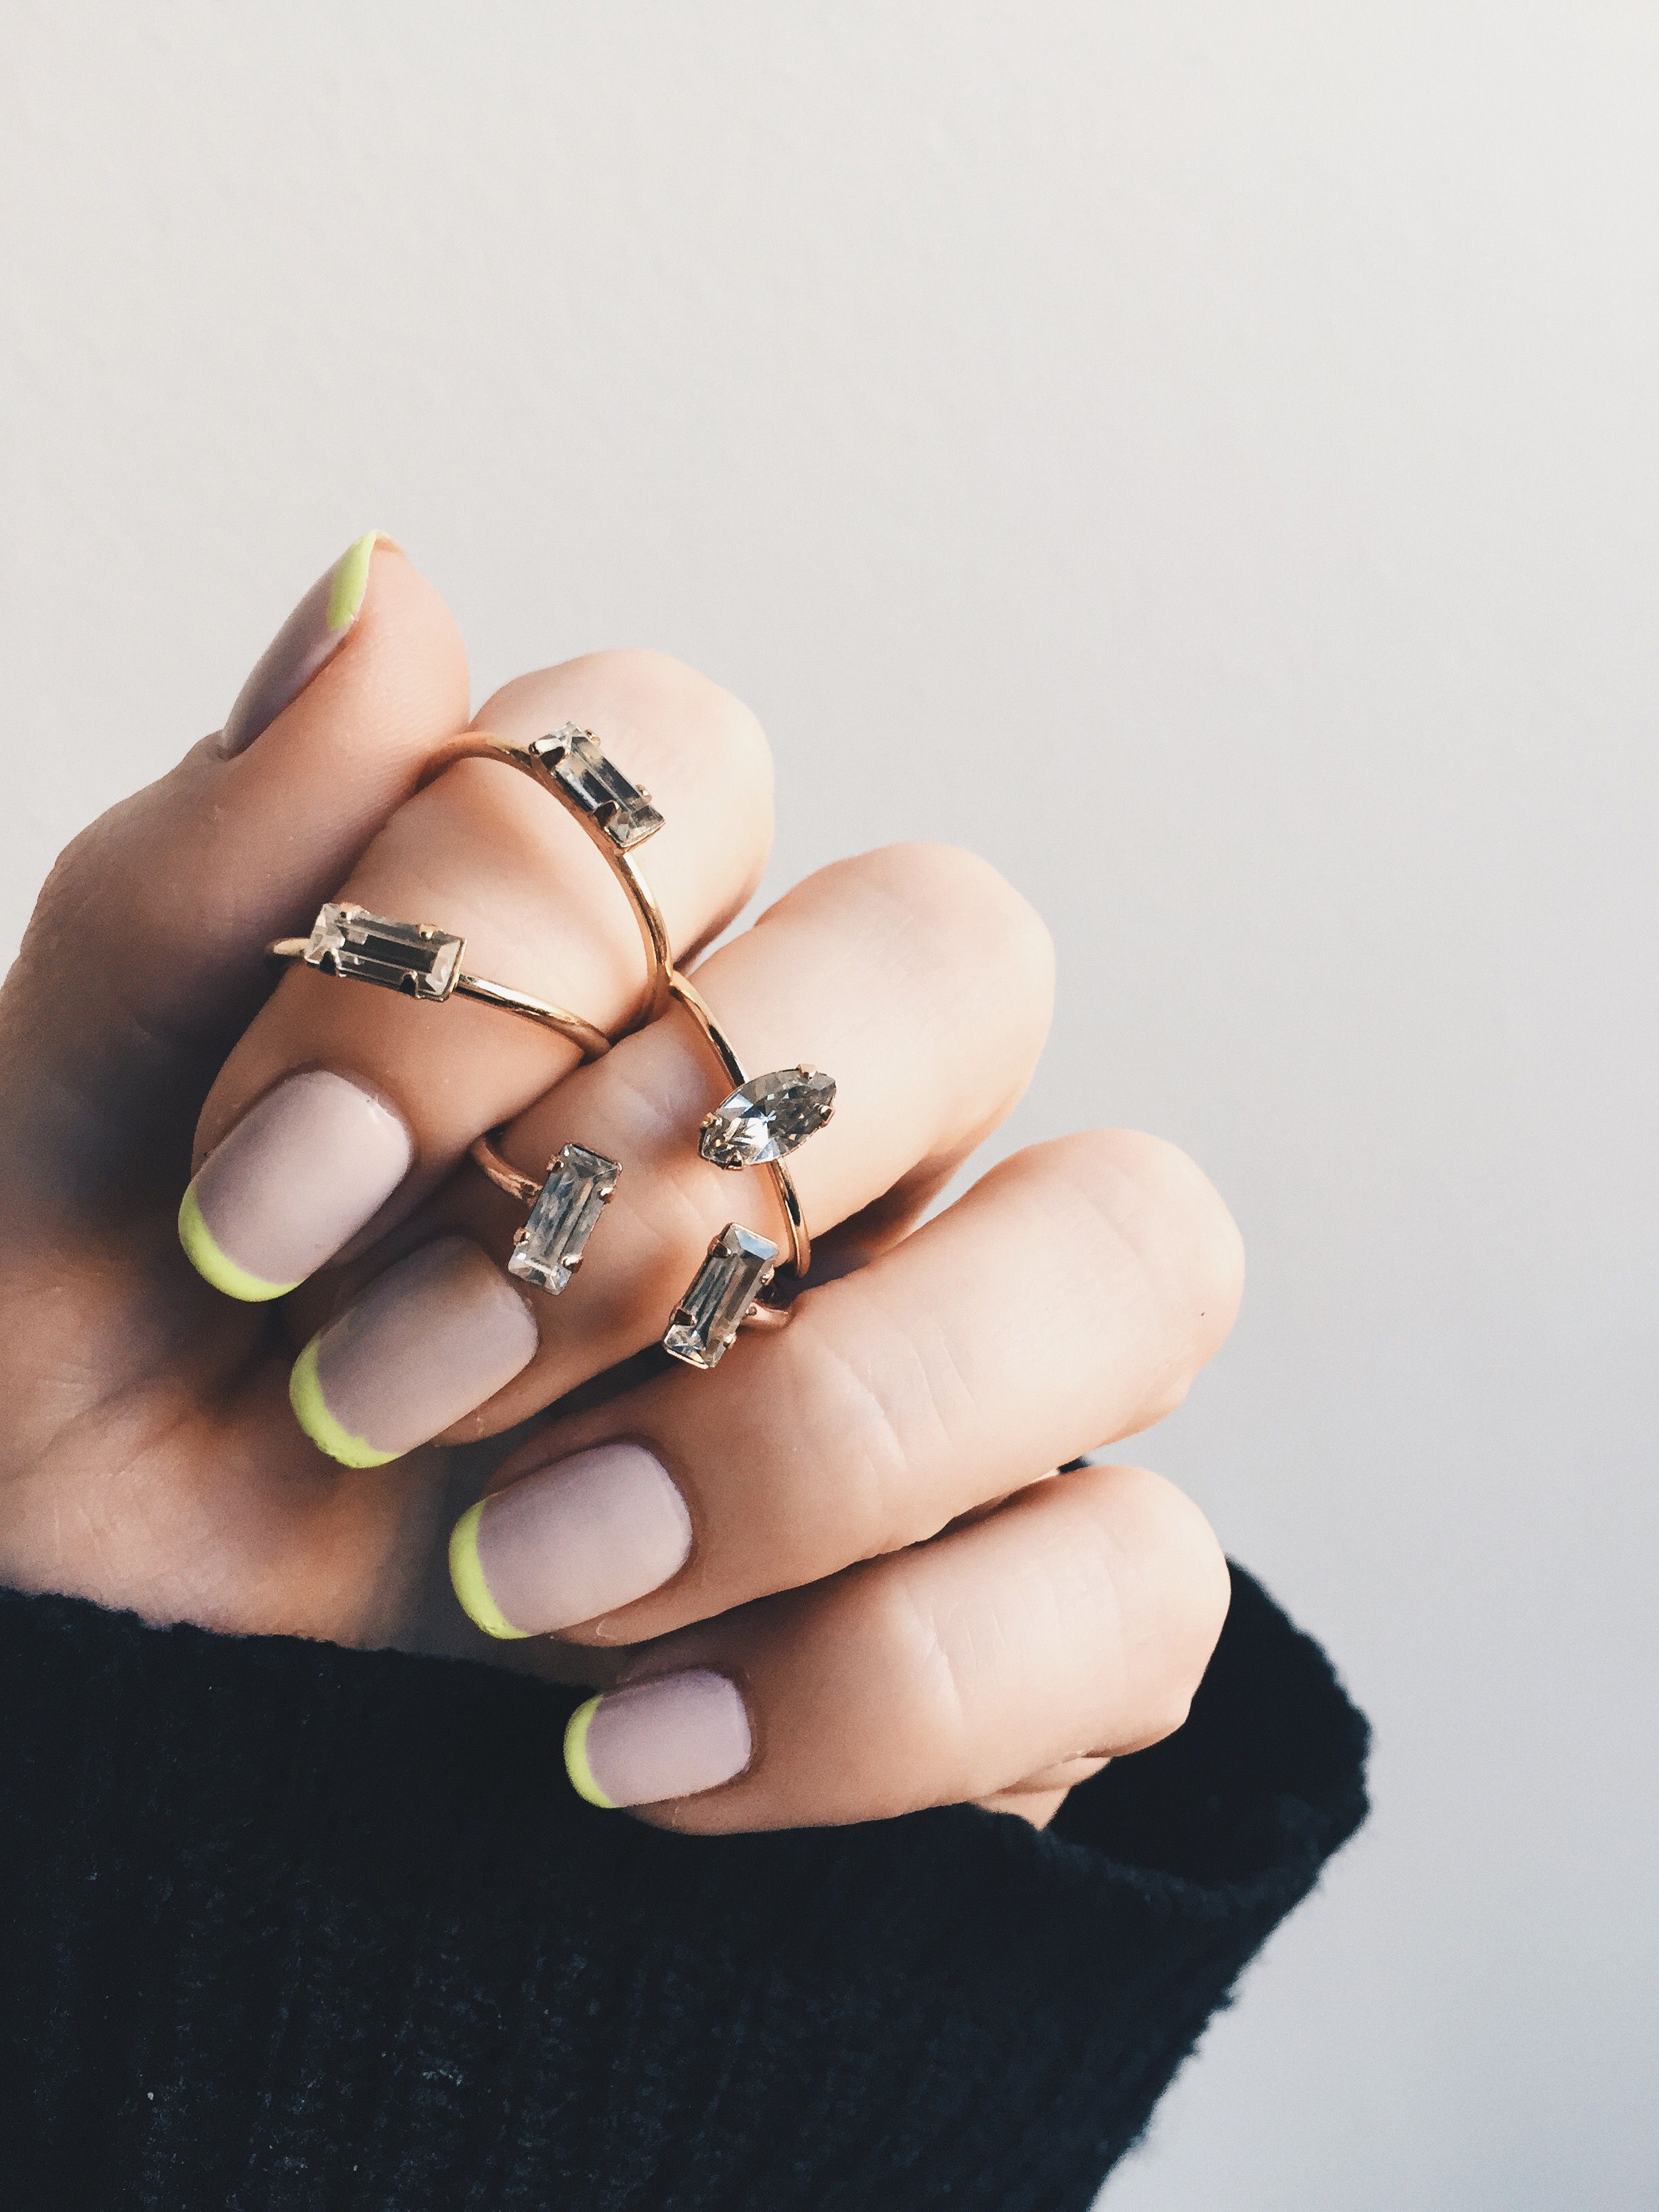 These @Bing Bang NYC RINGS and neon tipped mani are amazing! Click for more sparkly inspo!